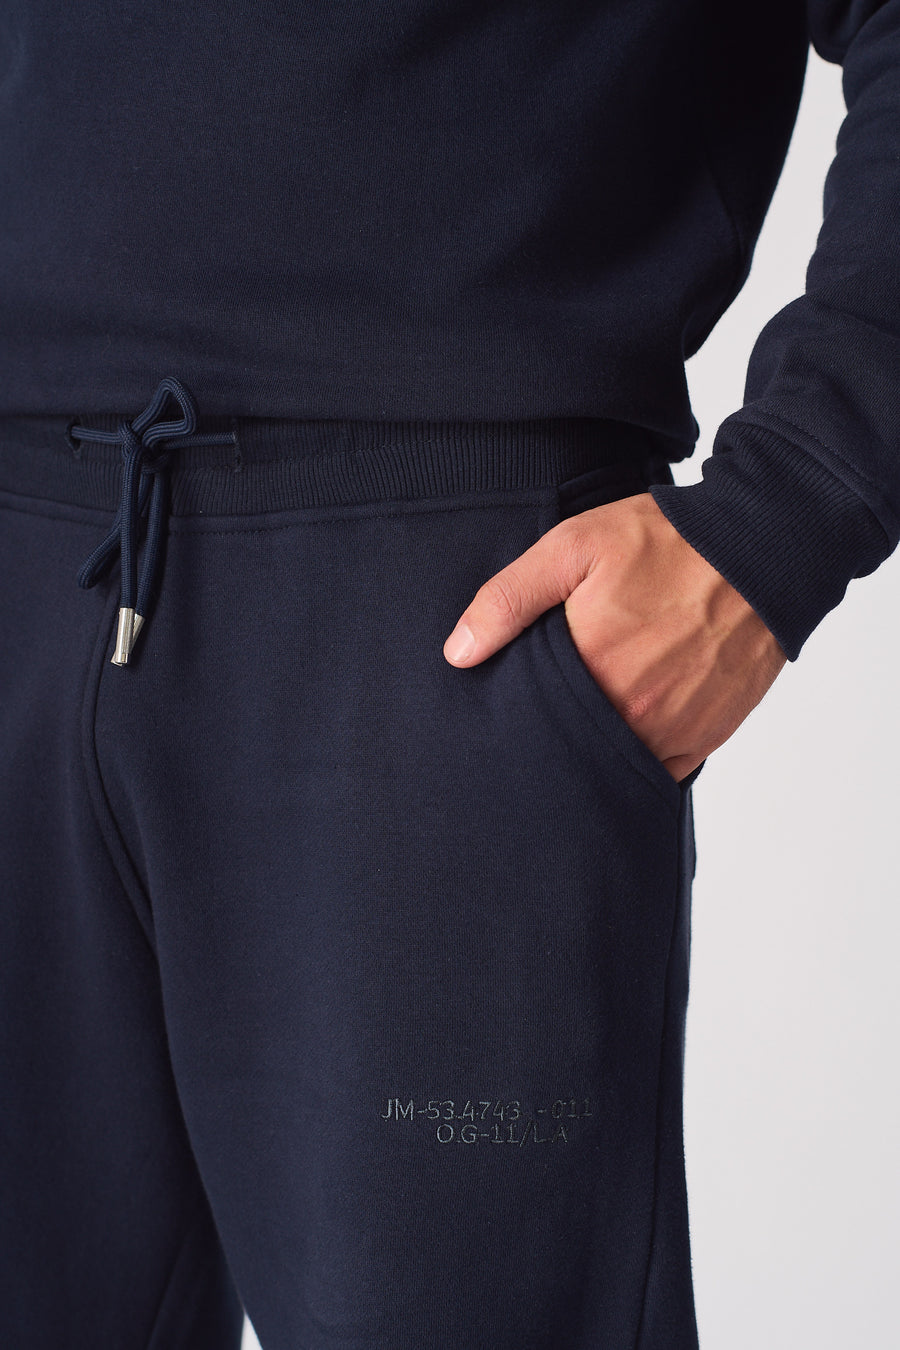 EMBROIDERY DETAIL TRACKSUIT JOGGERS - NAVY BLUE